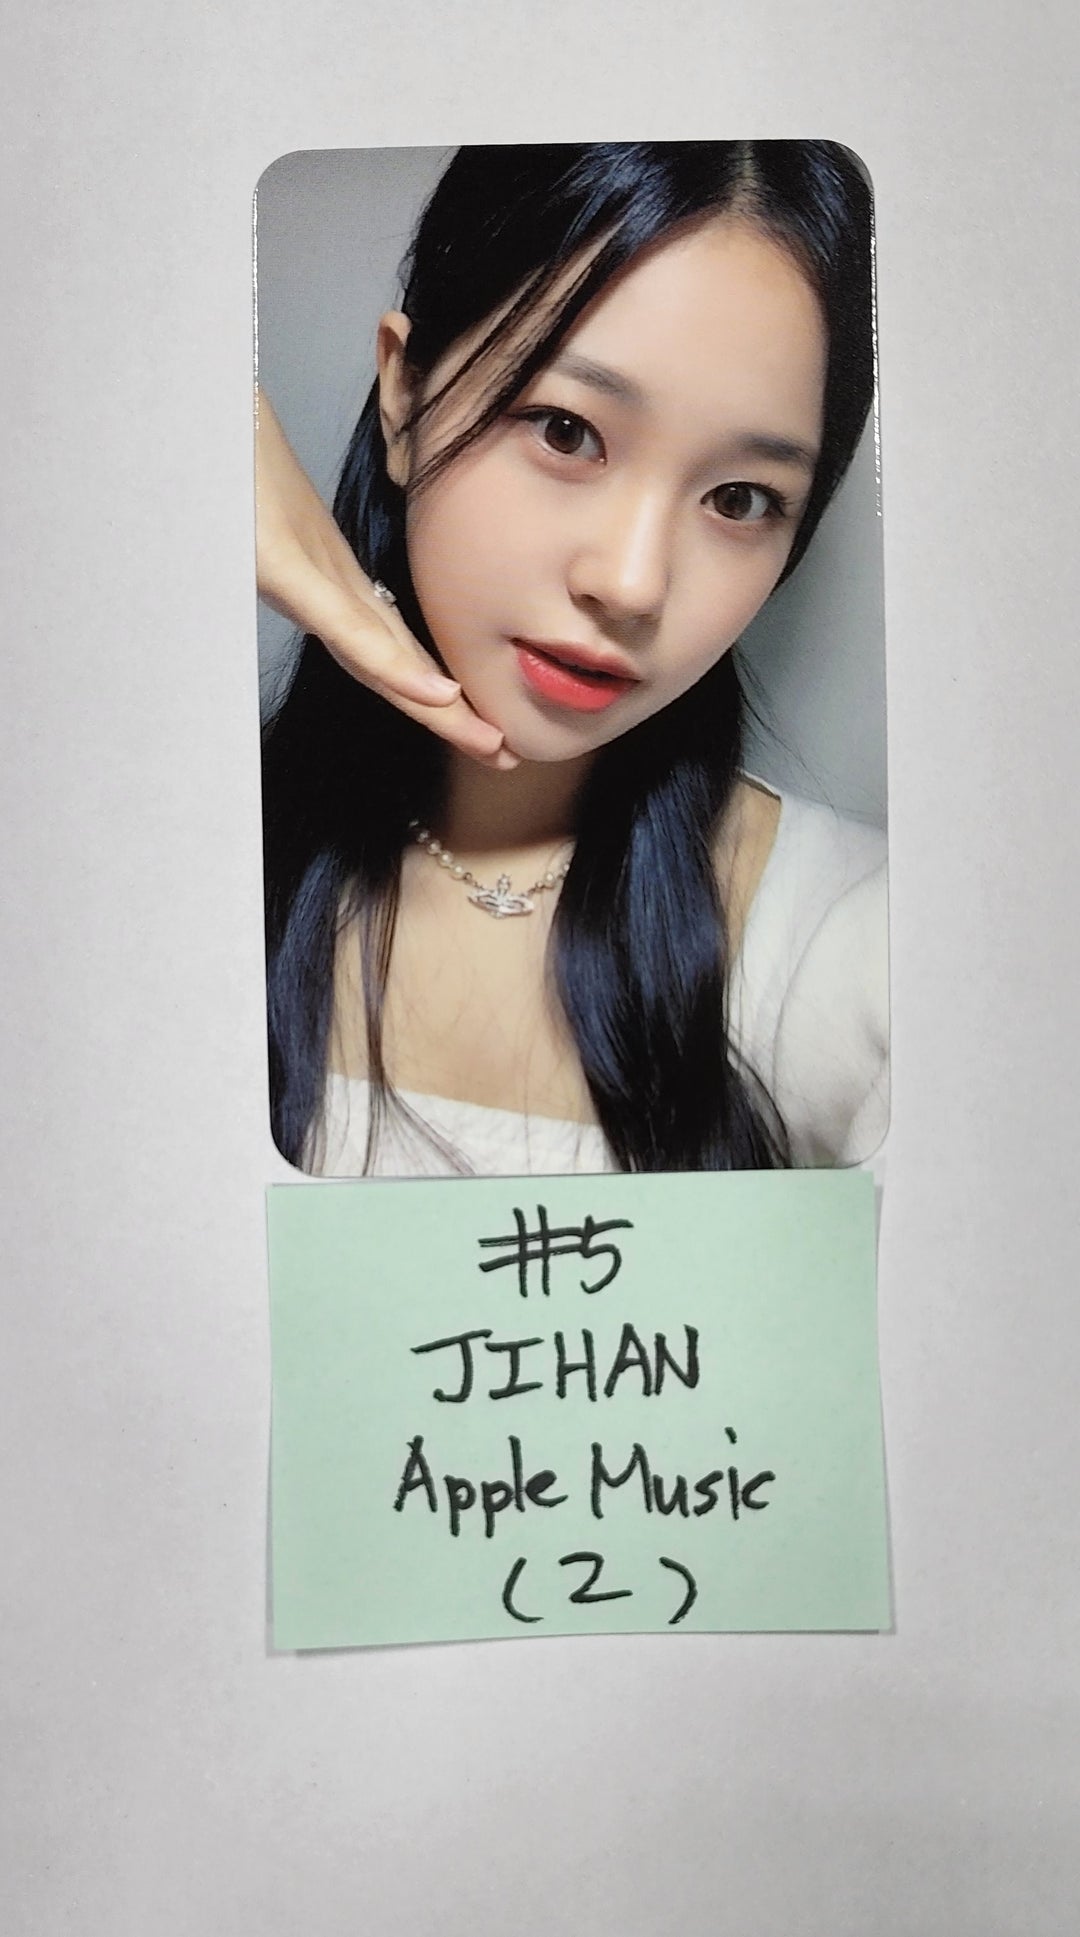 Weeekly "Play Game : AWAKE" - Apple Music Fansign Event Photocard Round 6